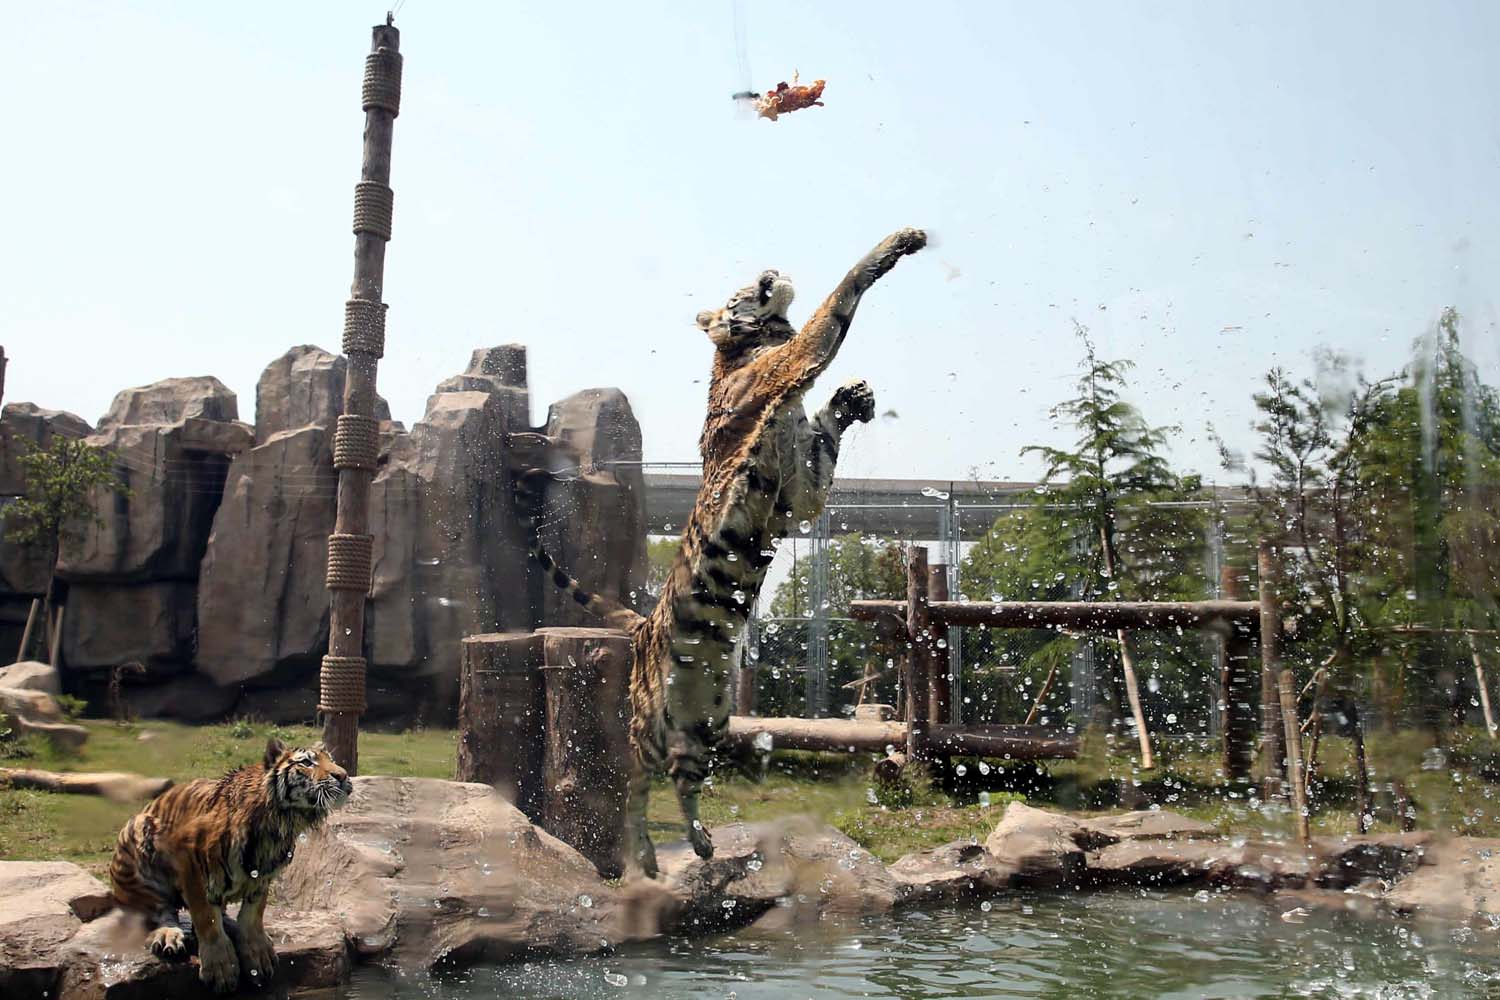 May 25, 2013. A tiger leaping to reach a suspended piece of meat during feeding time in their enclosure at the Shanghai Wildlife Zoo.